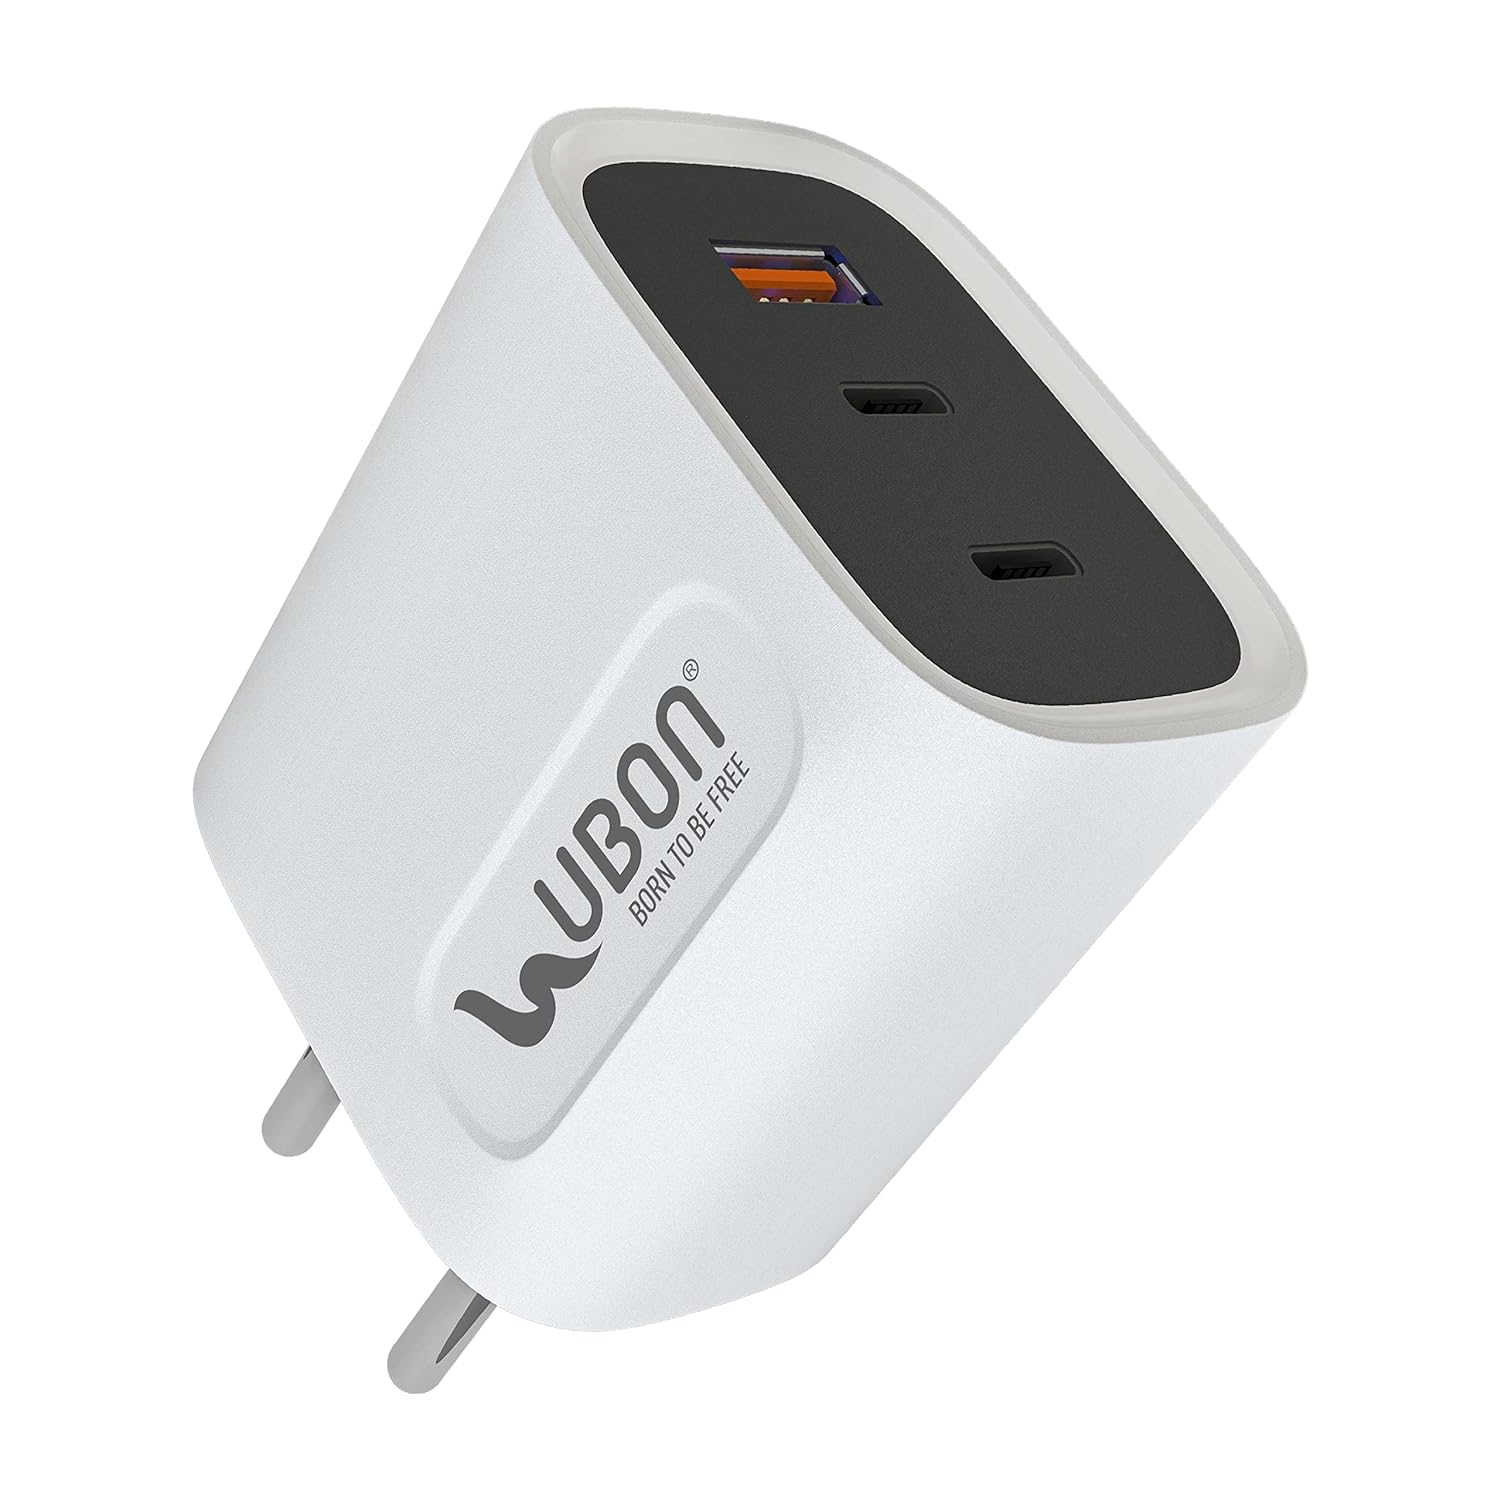 UBON 45W Fast Charger CH-1000 with GaN Technology,Triple Ports 1 USB & 2 Type-C Port,Overvoltage | Overpower | Short-Circuit Protection, Compatible with Tablets (45)